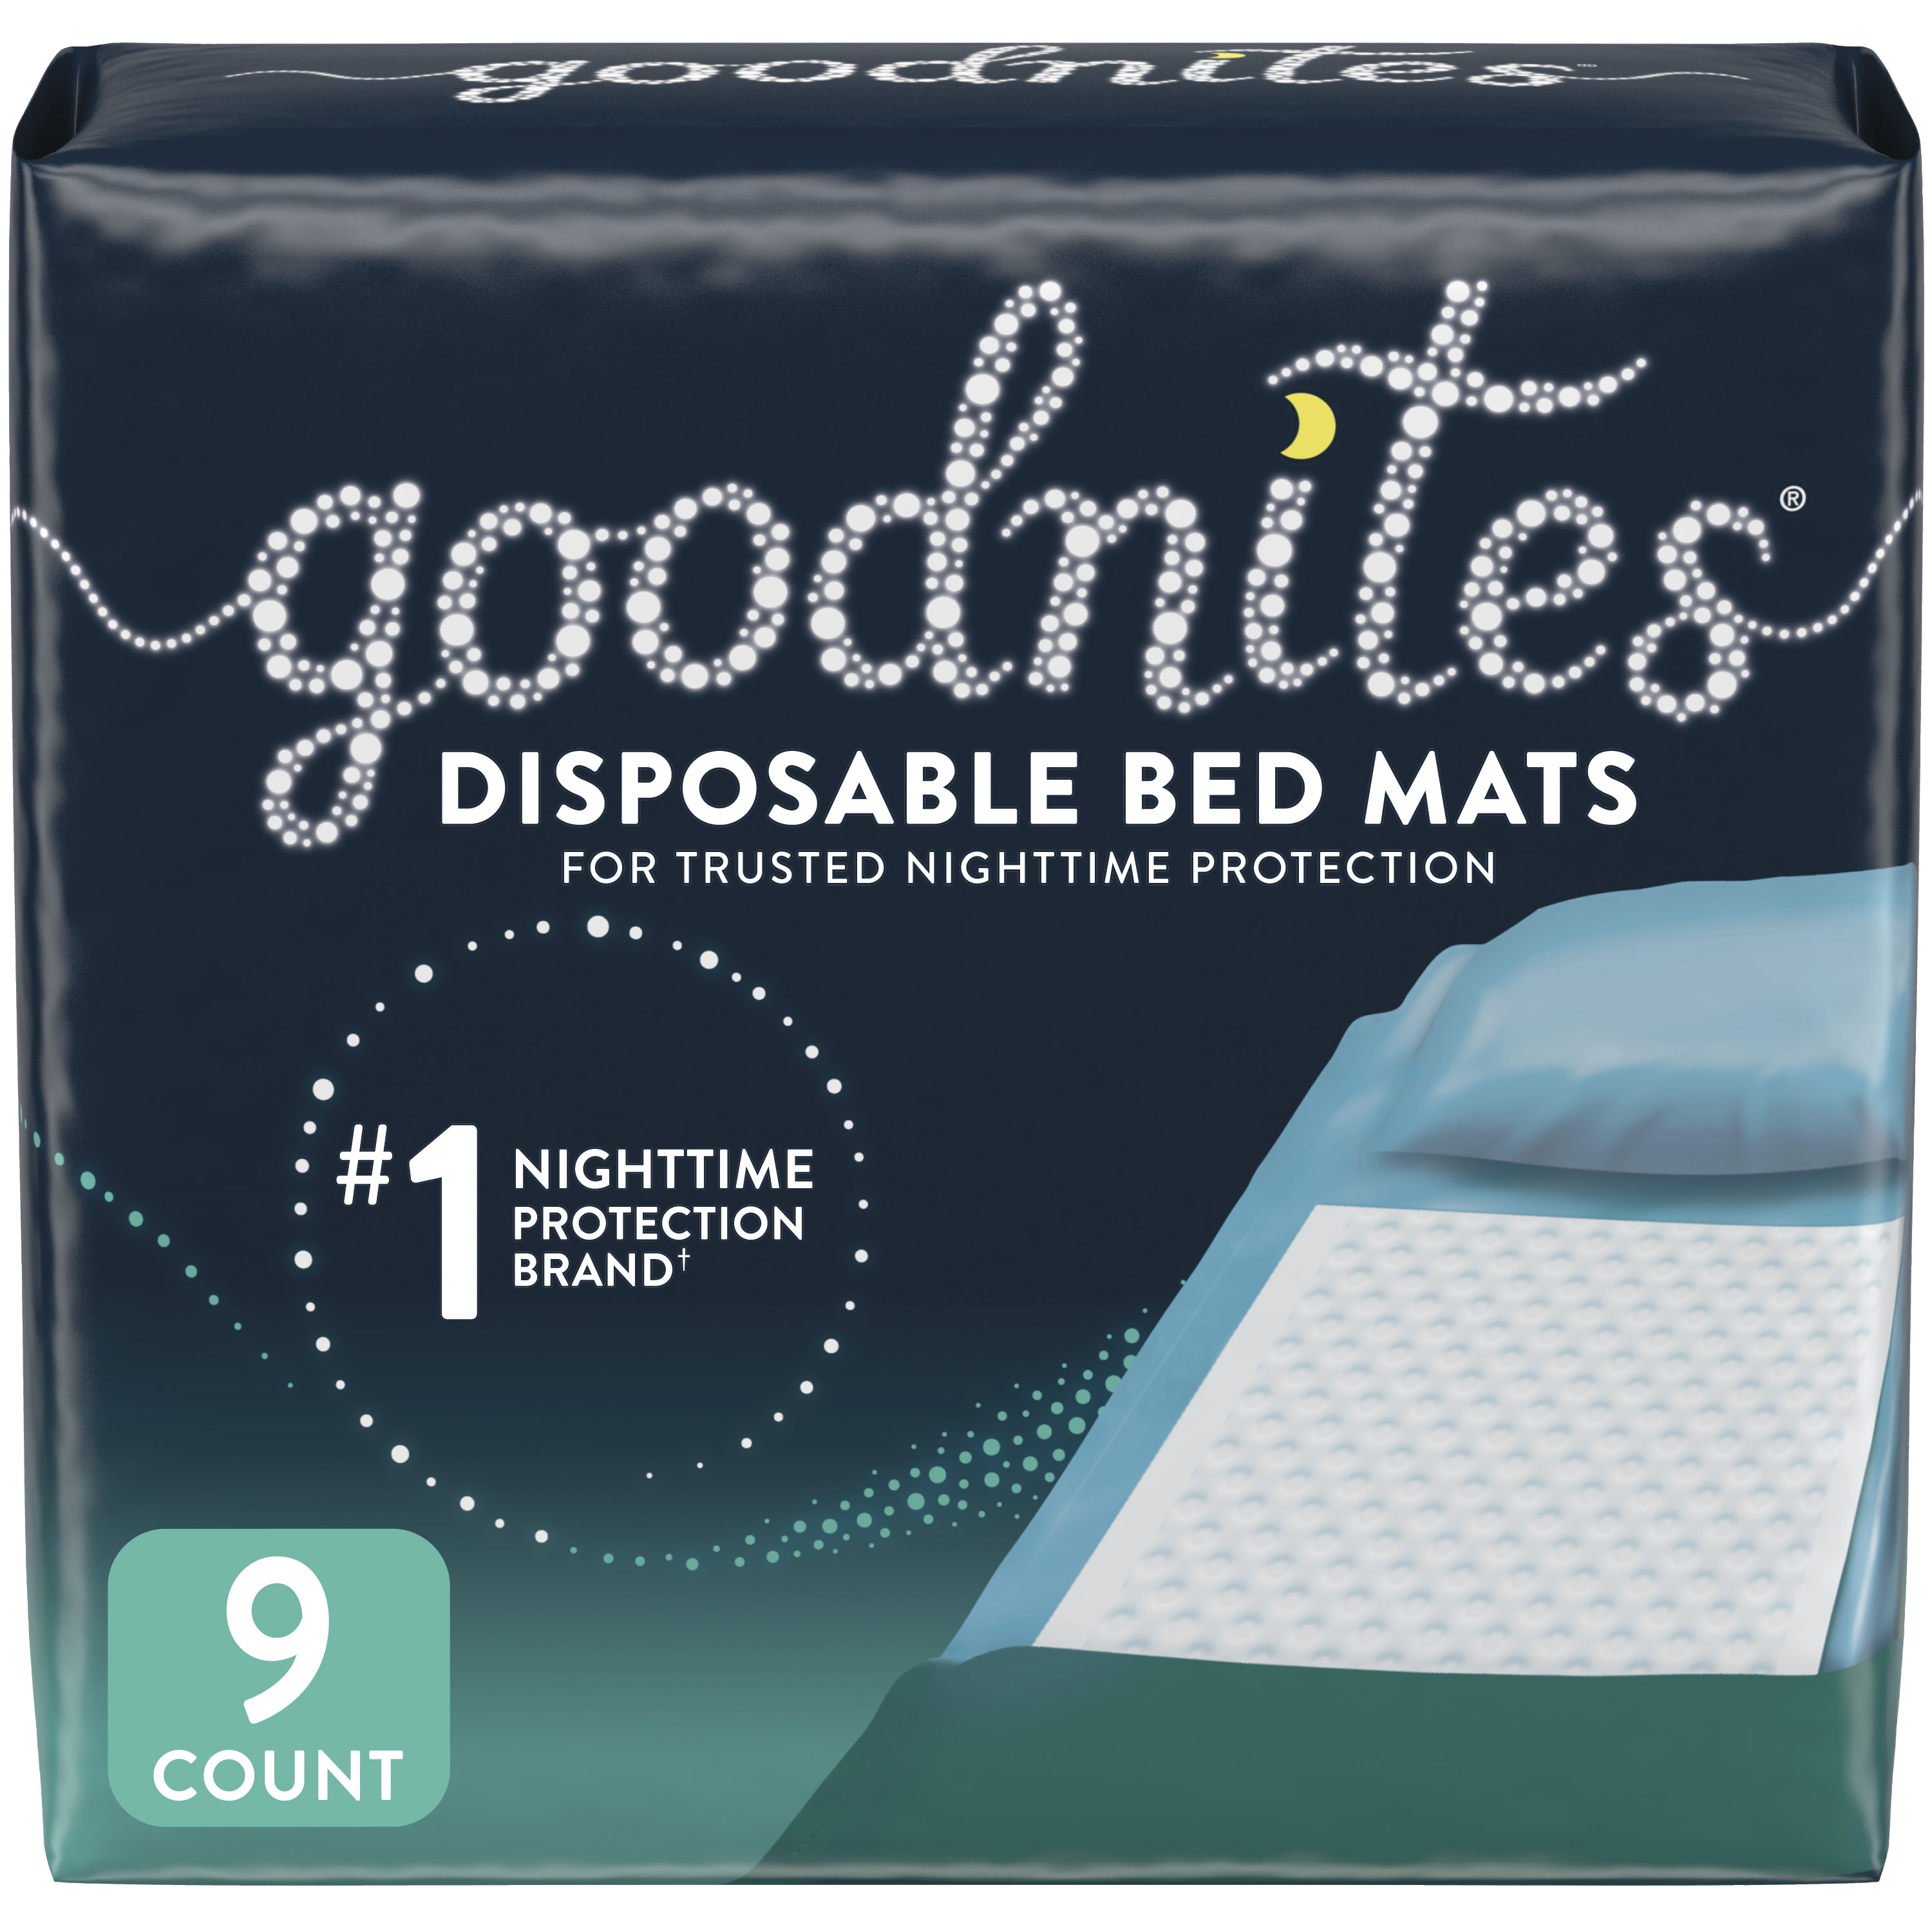 Goodnites Disposable Bed Pads for Bedwetting, 9 Ct (Select for More Options) - image 1 of 9